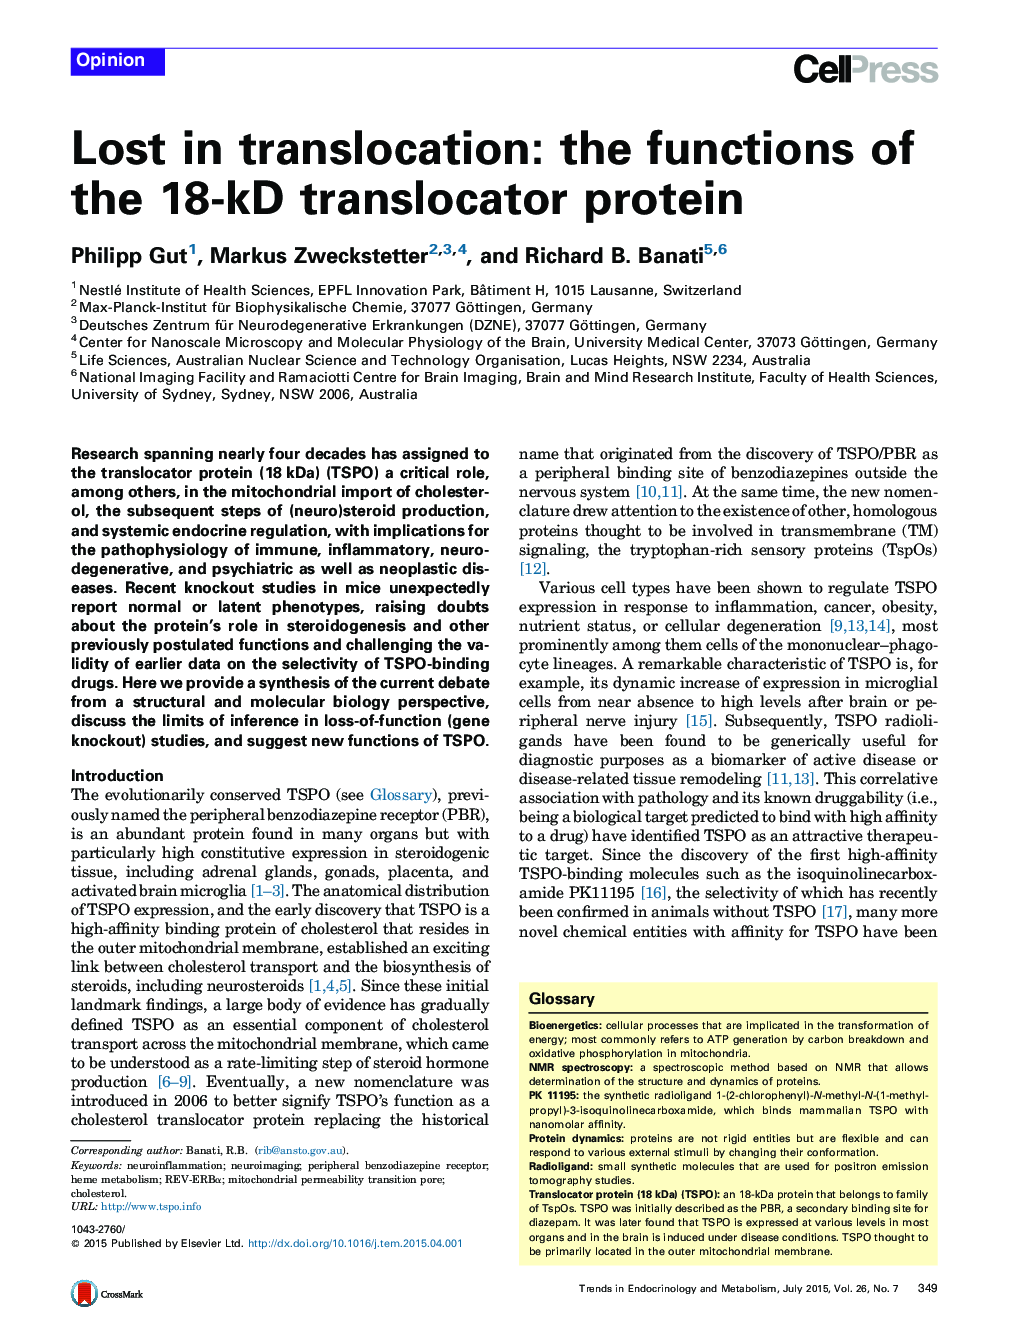 Lost in translocation: the functions of the 18-kD translocator protein